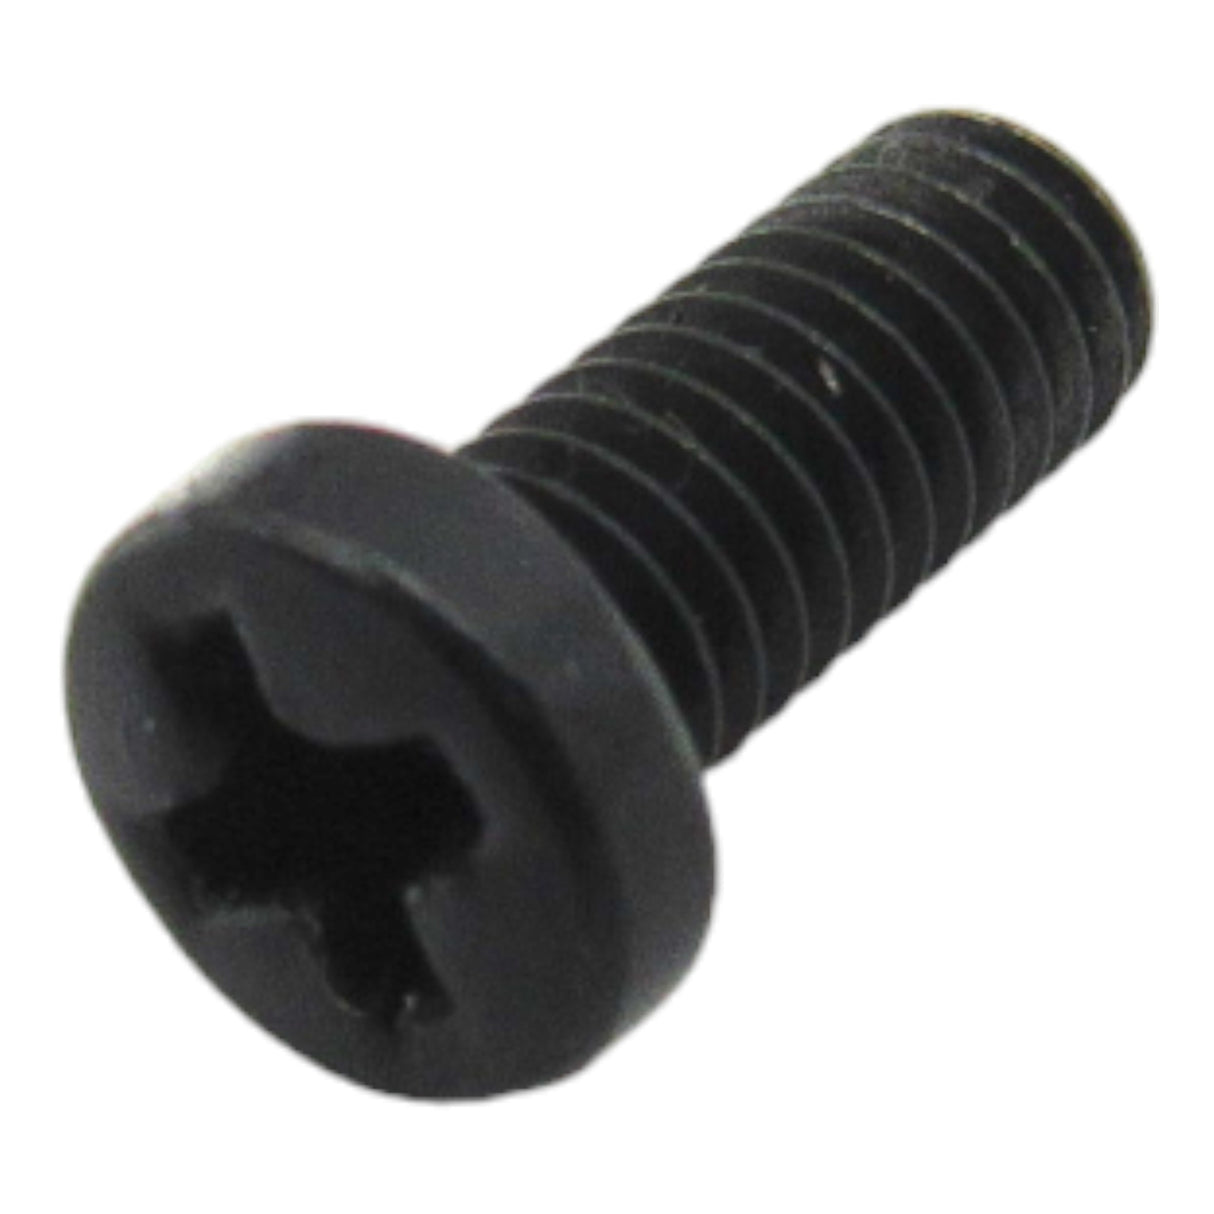 Arm Cover Screw for Elna Model 62 Sewing Machine